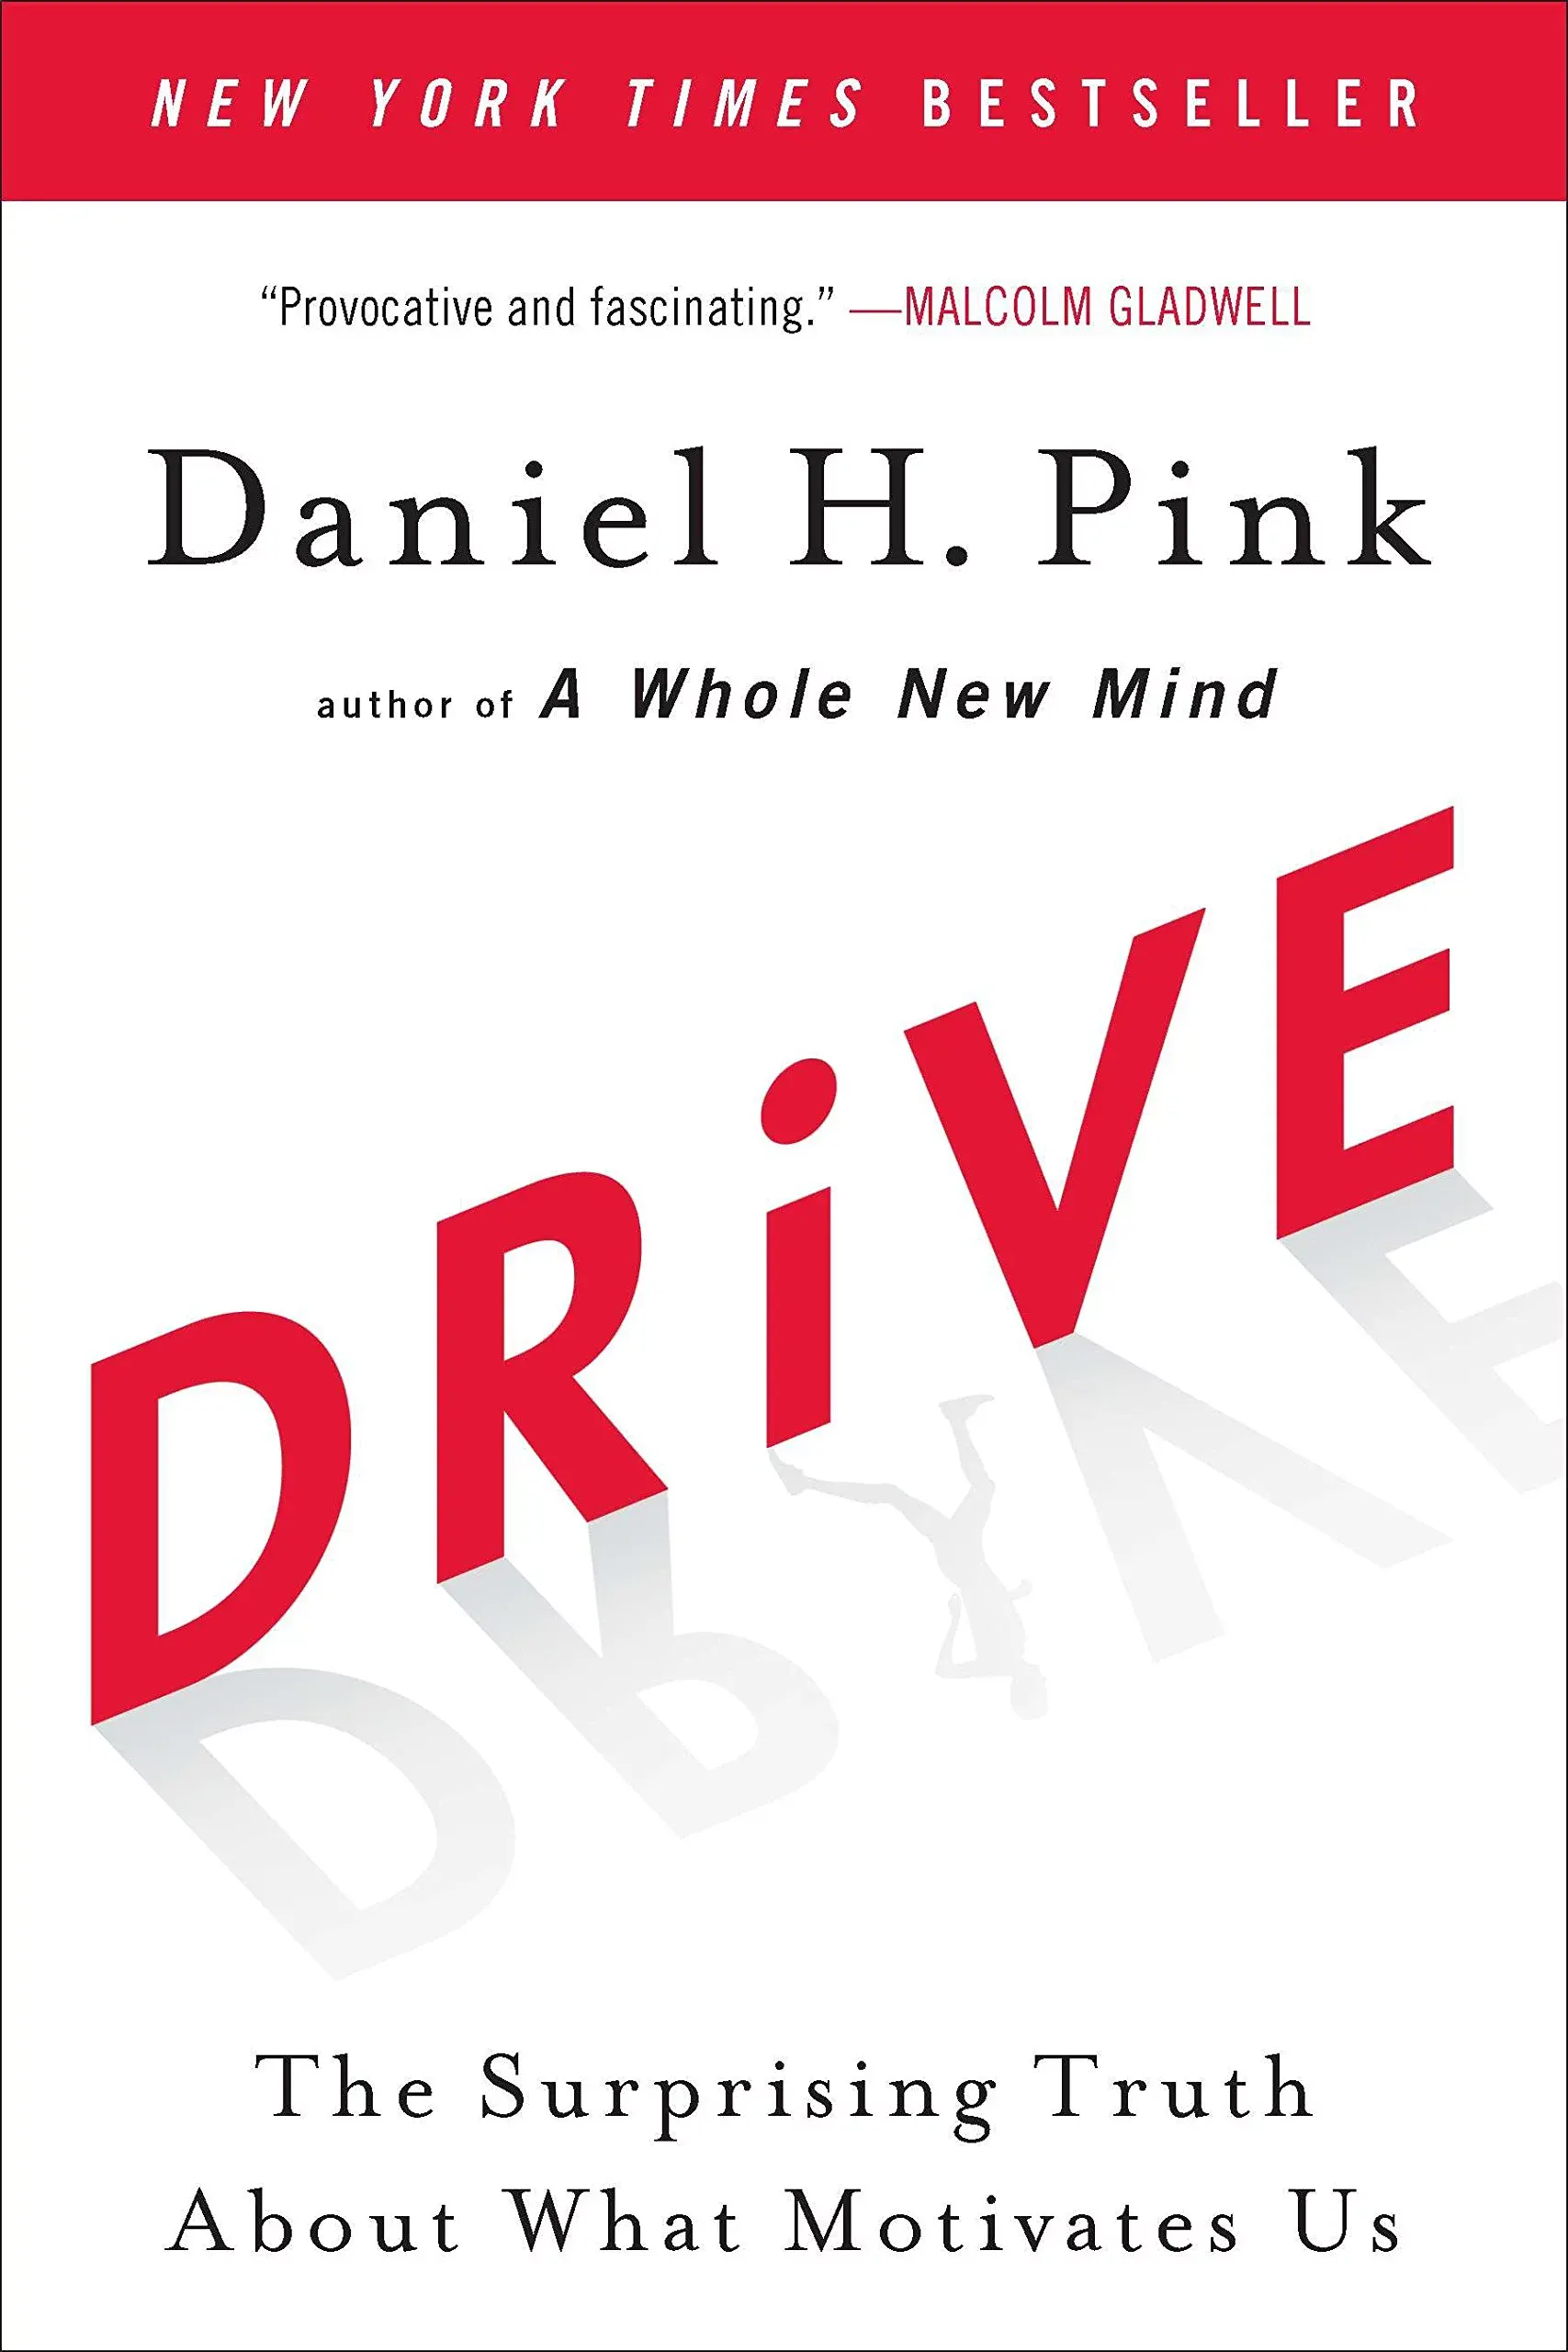 Drive by Daniel H. Pink asserts that the secret to high performance and satisfaction-at work, at school, and at home—is the deeply human need to direct our own lives, to learn and create new things, and to do better by ourselves and our world.